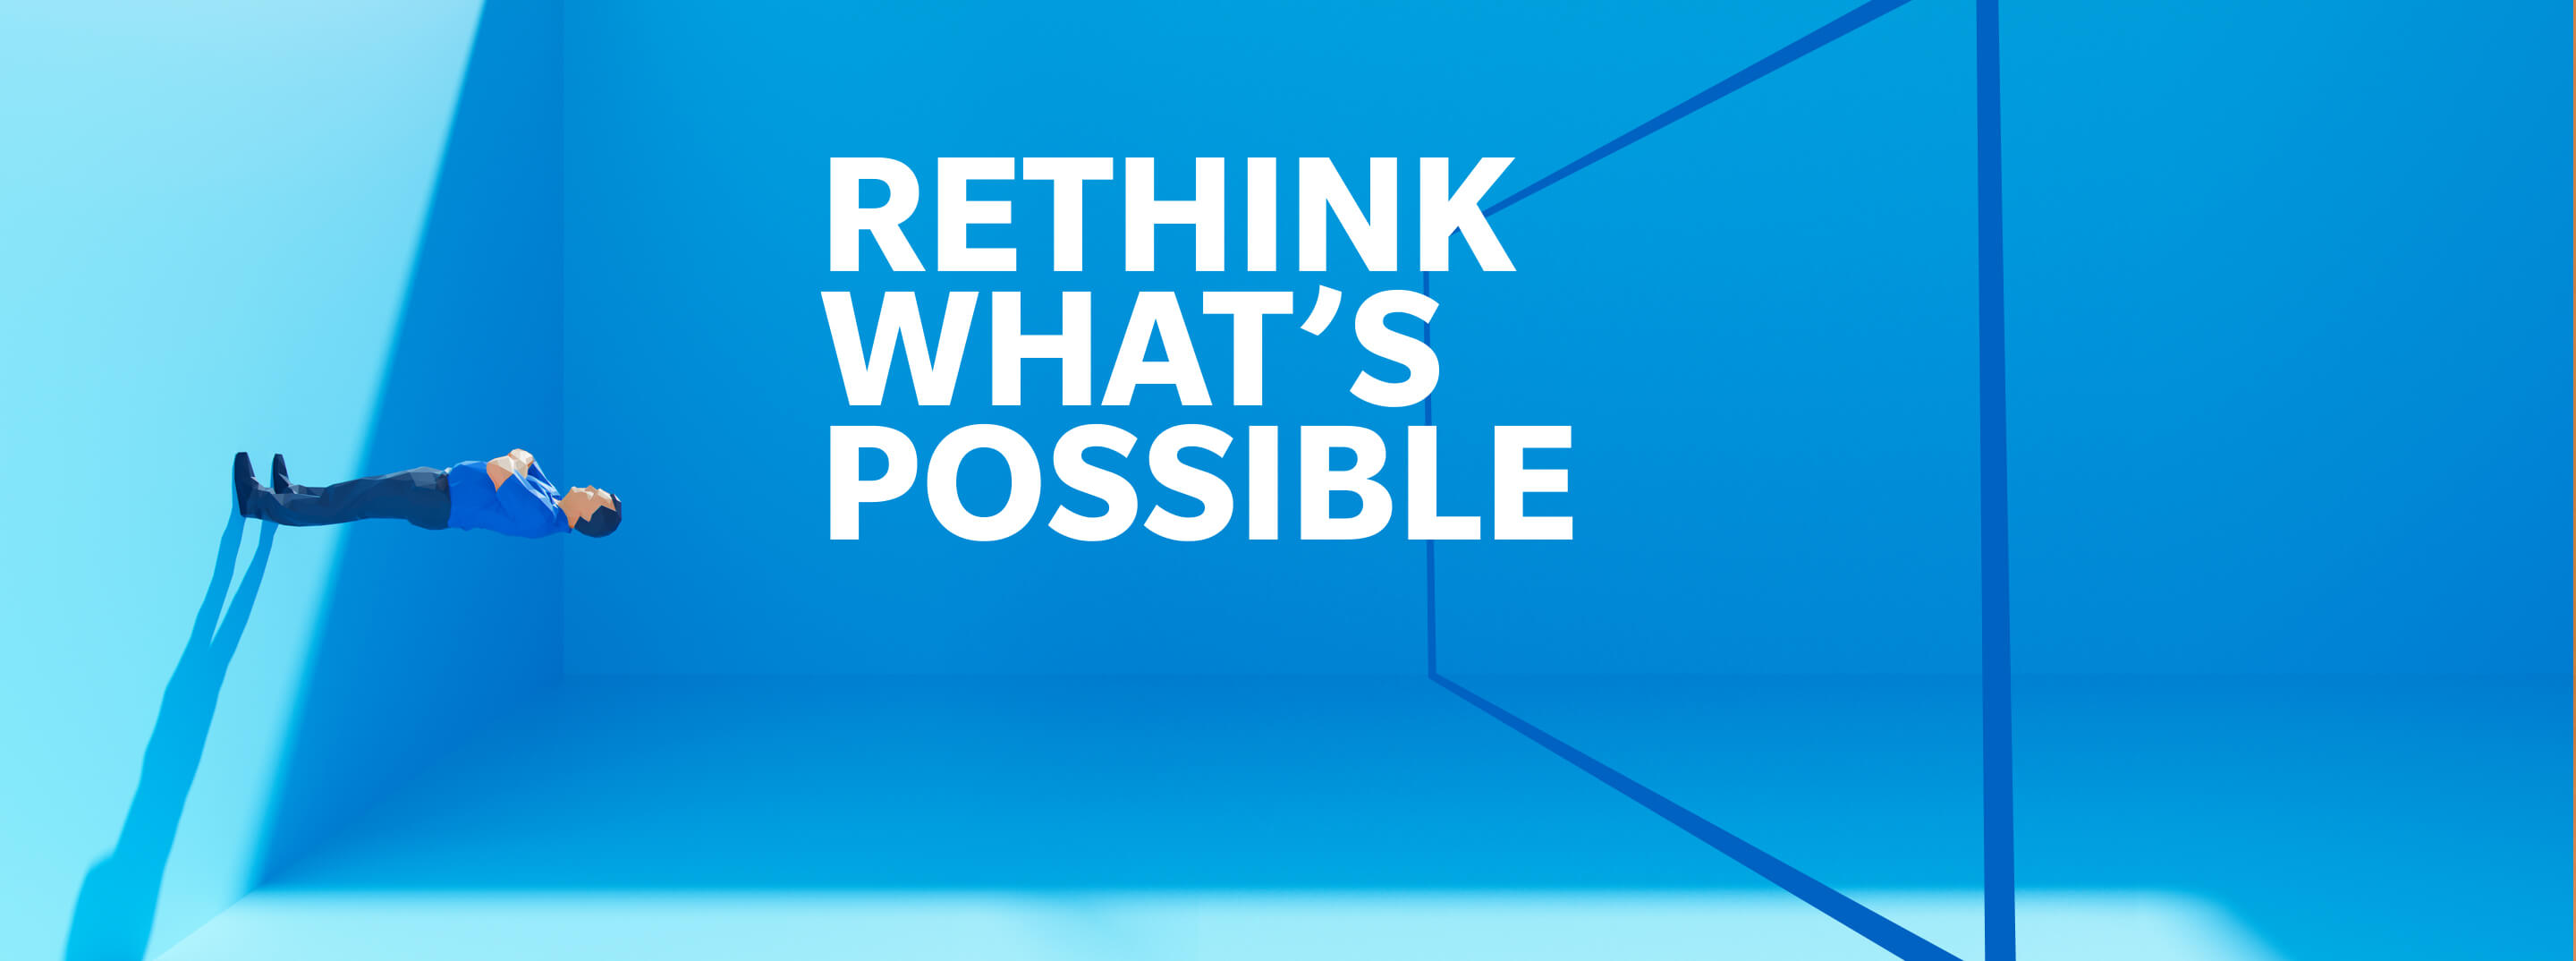 RETHINK WHAT'S POSSIBLE.